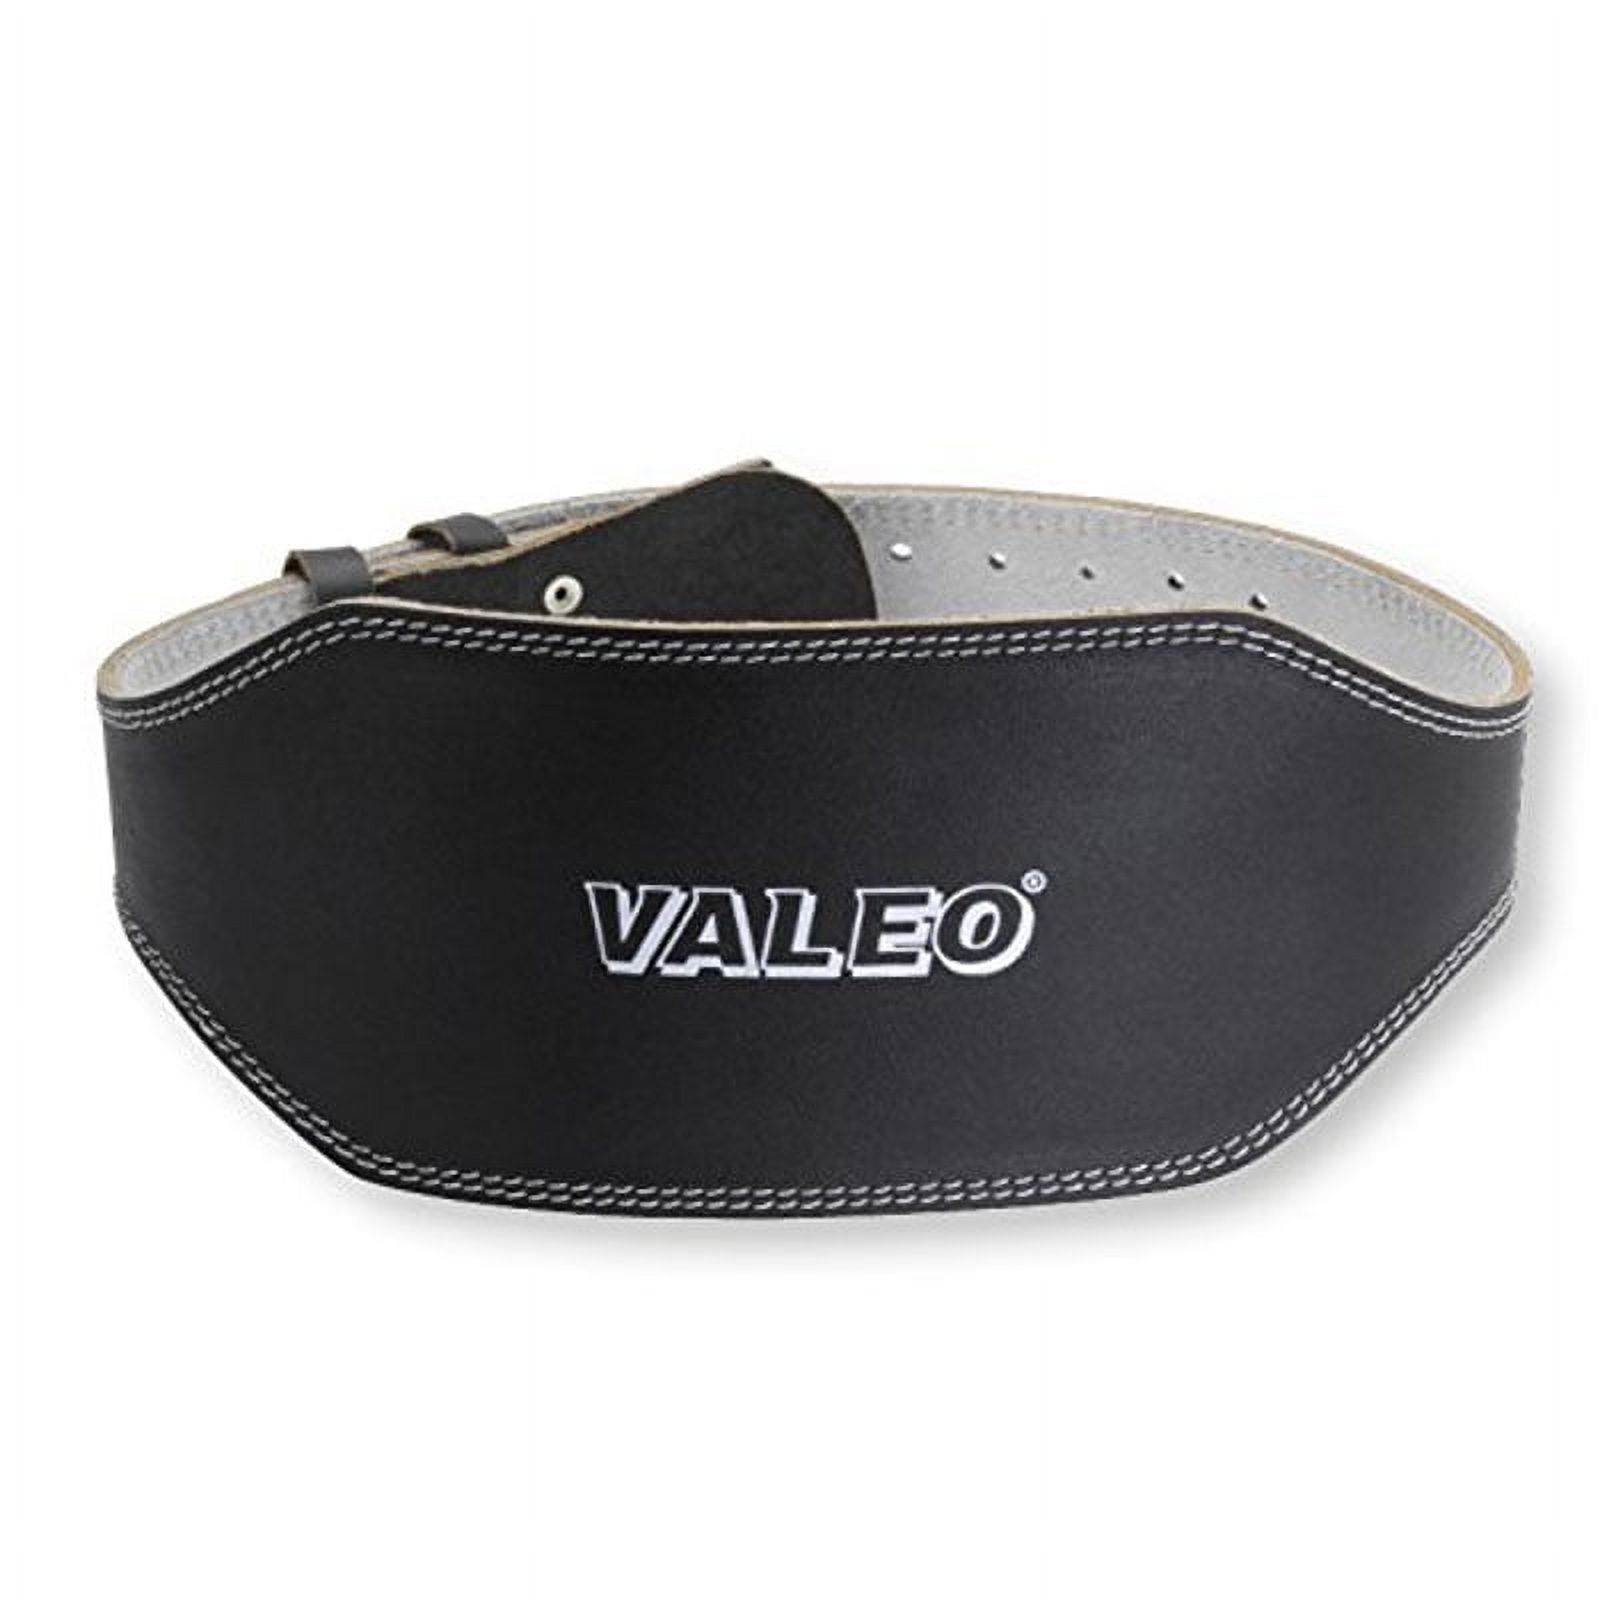 Valeo VRL6 6-Inch Padded Leather Lifting Belt For Men And Women With Back Support for Weightlifting And Suede Lined Foam Lumbar Pad - image 1 of 2